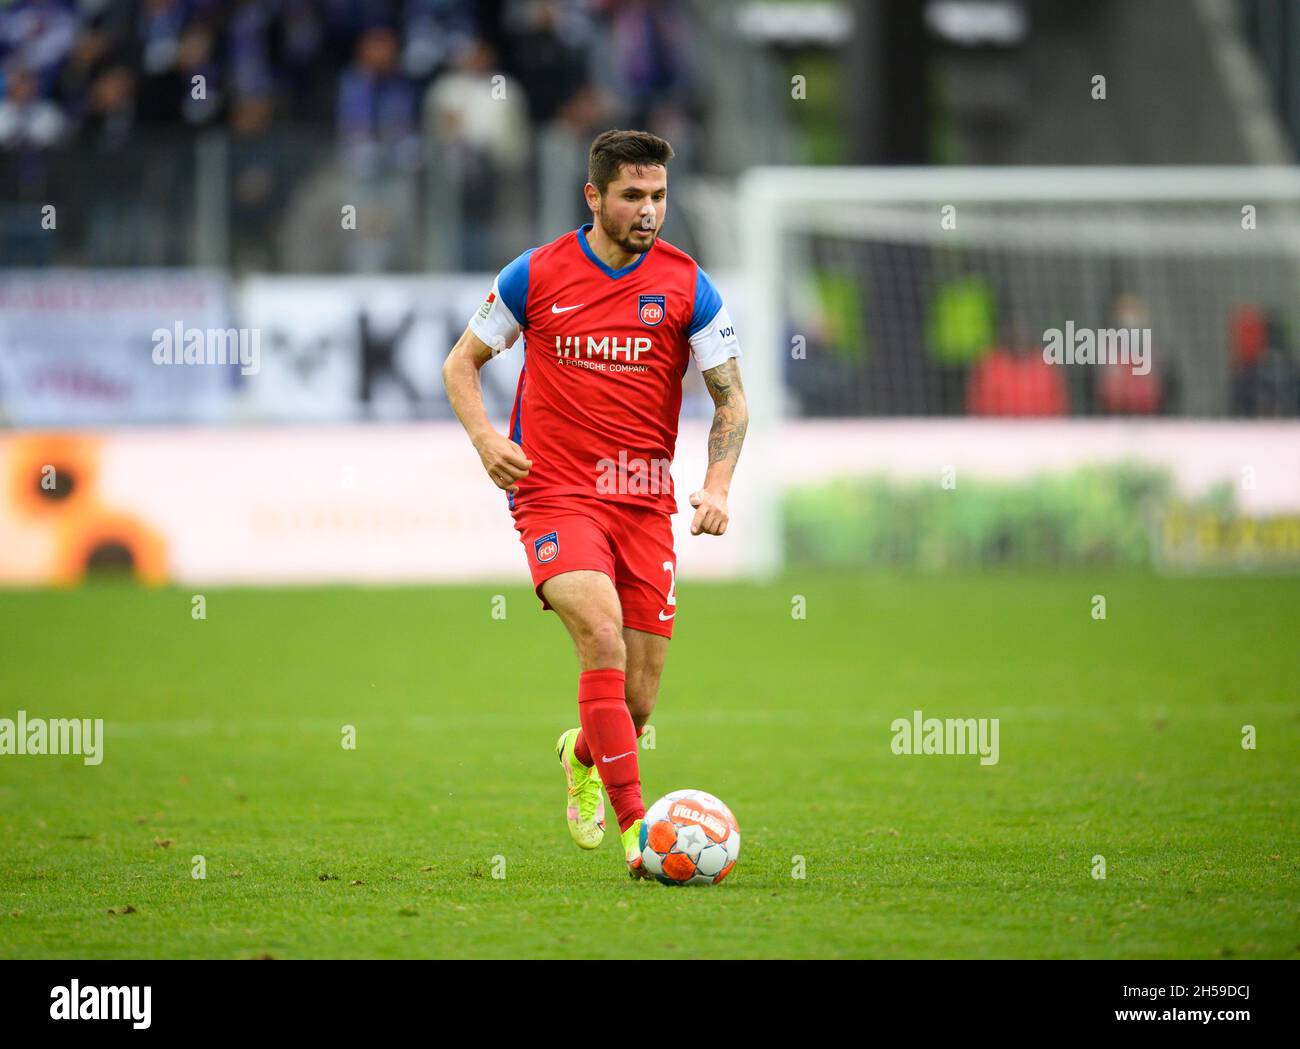 Aue, Germany. 07th Nov, 2021. Football: 2. Bundesliga, Erzgebirge Aue - 1. FC Heidenheim, Matchday 13, Erzgebirgsstadion. Heidenheim's Marnon Busch plays the ball. Credit: Robert Michael/dpa-Zentralbild/dpa - IMPORTANT NOTE: In accordance with the regulations of the DFL Deutsche Fußball Liga and/or the DFB Deutscher Fußball-Bund, it is prohibited to use or have used photographs taken in the stadium and/or of the match in the form of sequence pictures and/or video-like photo series./dpa/Alamy Live News Stock Photo